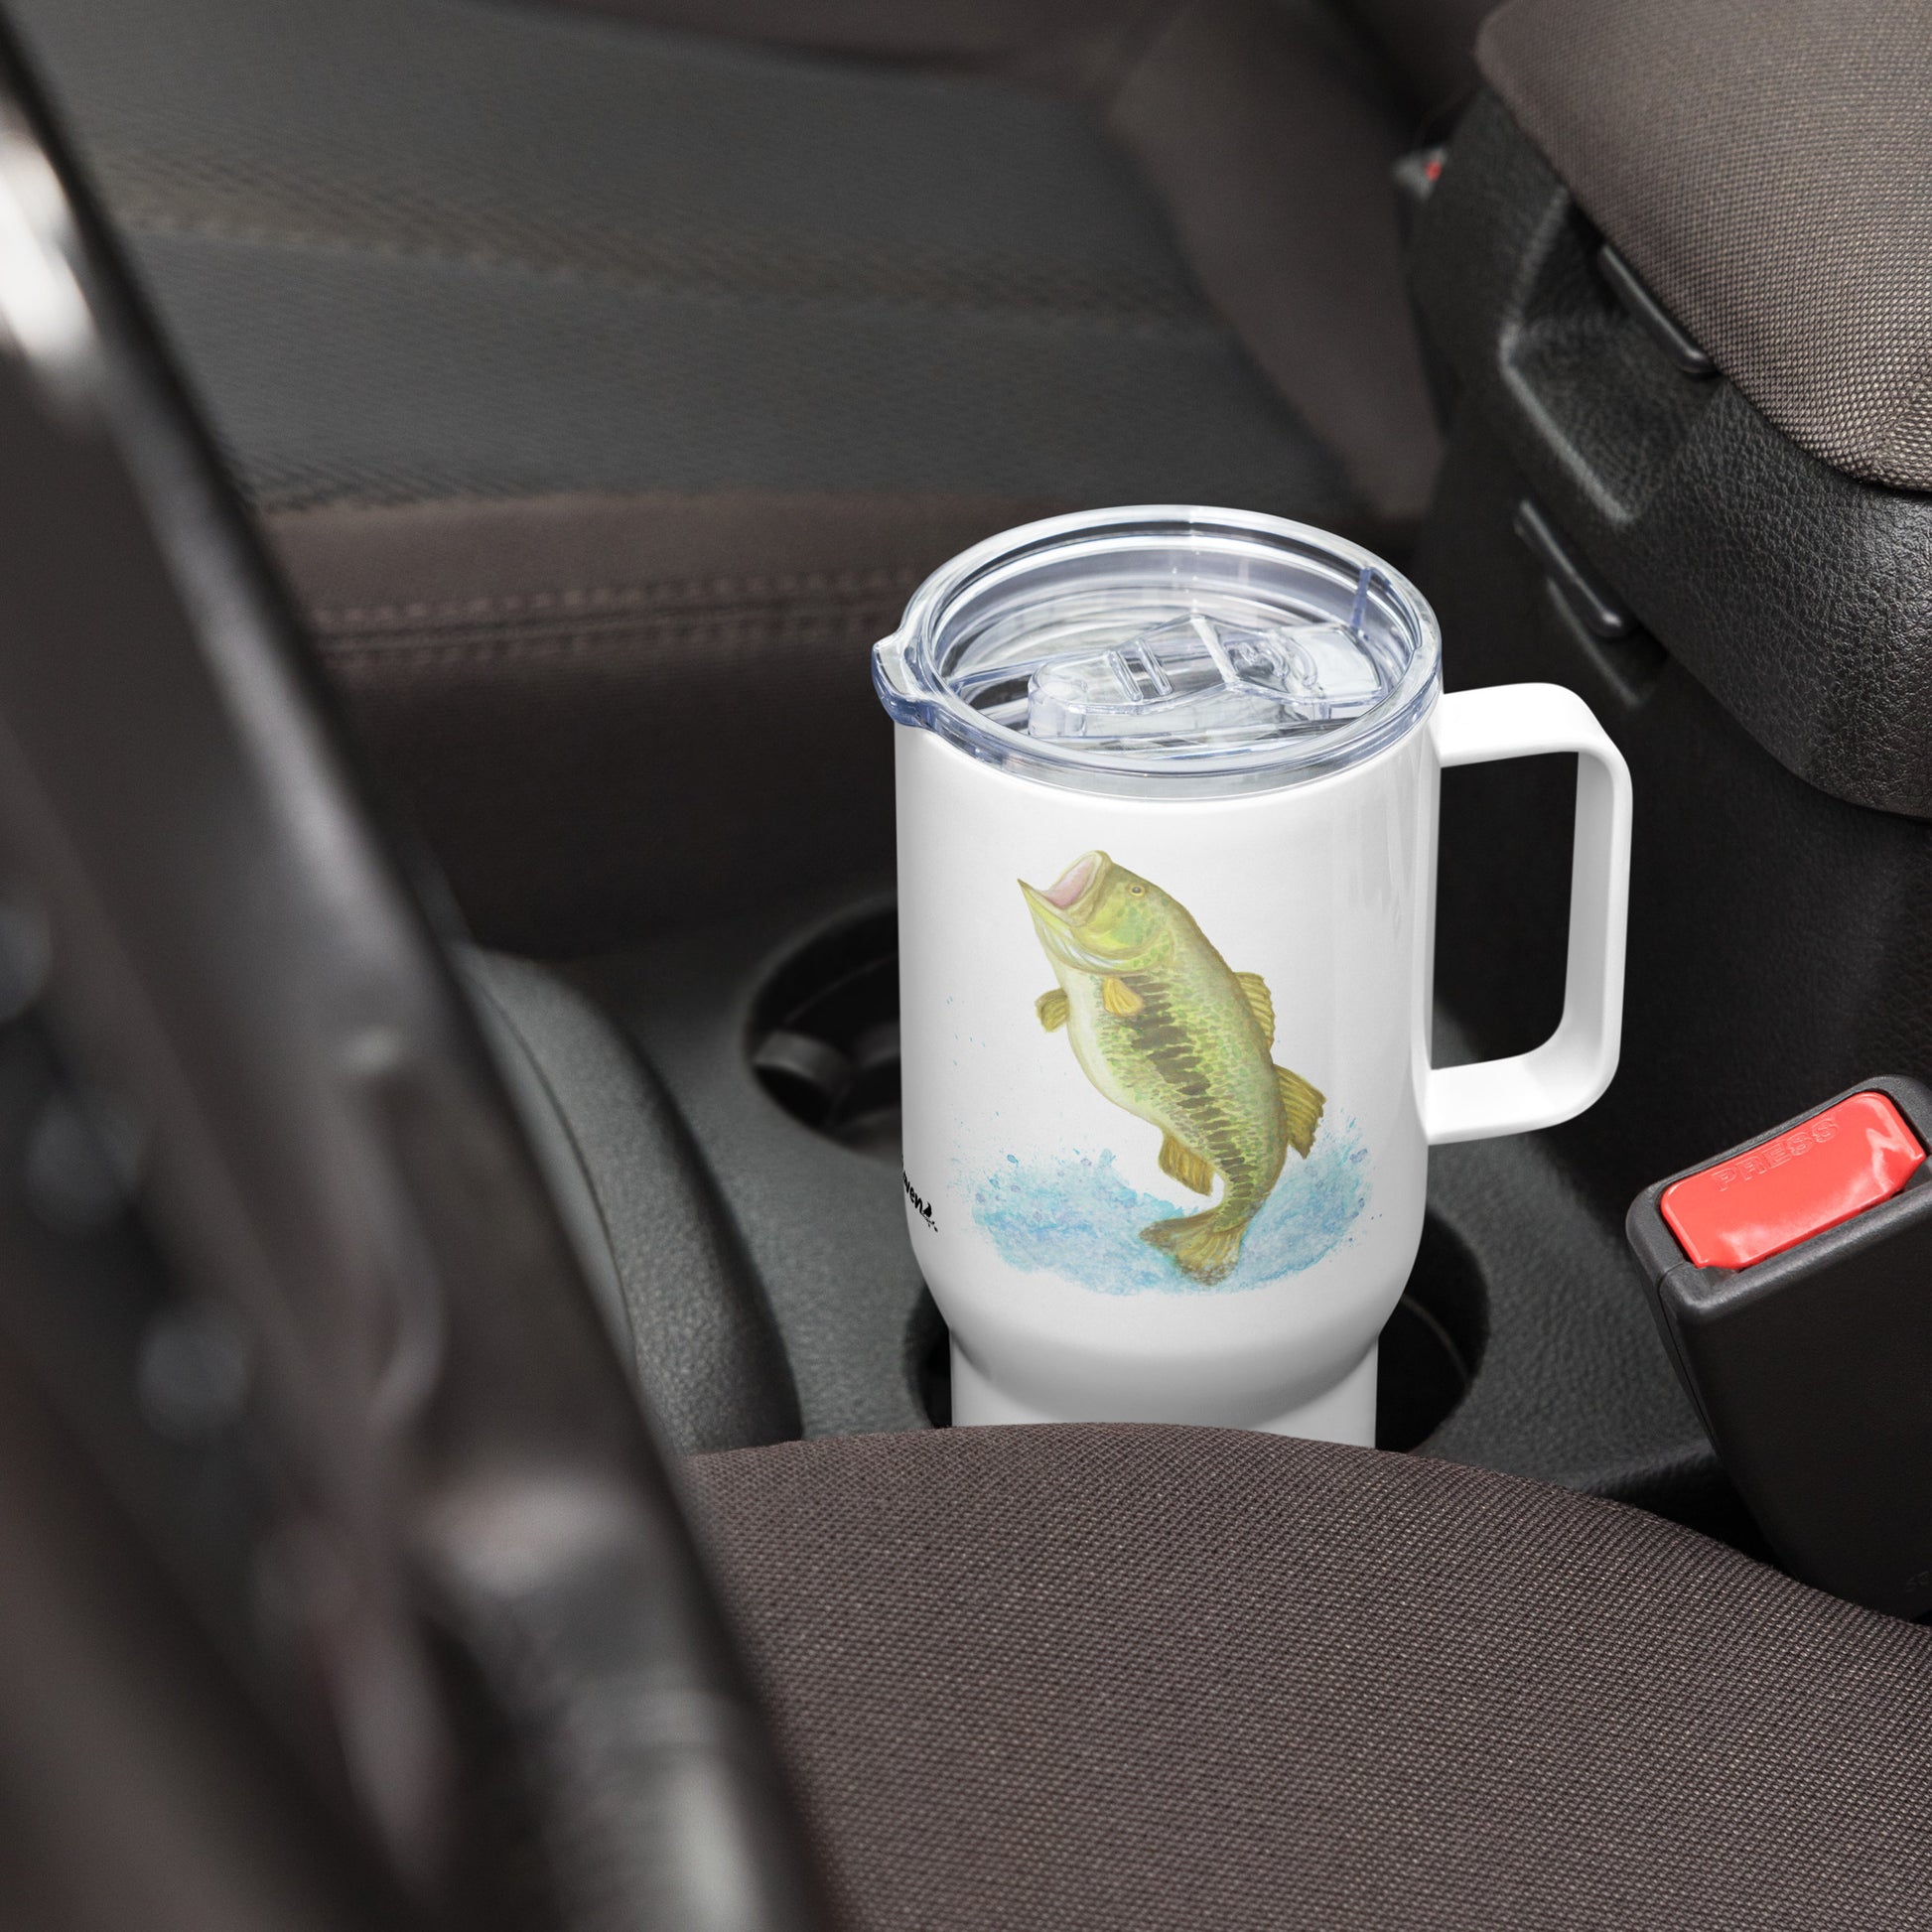 Stainless steel travel mug with handle. Holds 25 ounces of hot or cold drinks. Has print of watercolor bass fish on both sides. Fits most car cup holders. Comes with spill-proof BPA-free plastic lid. Shown in car cup holder.